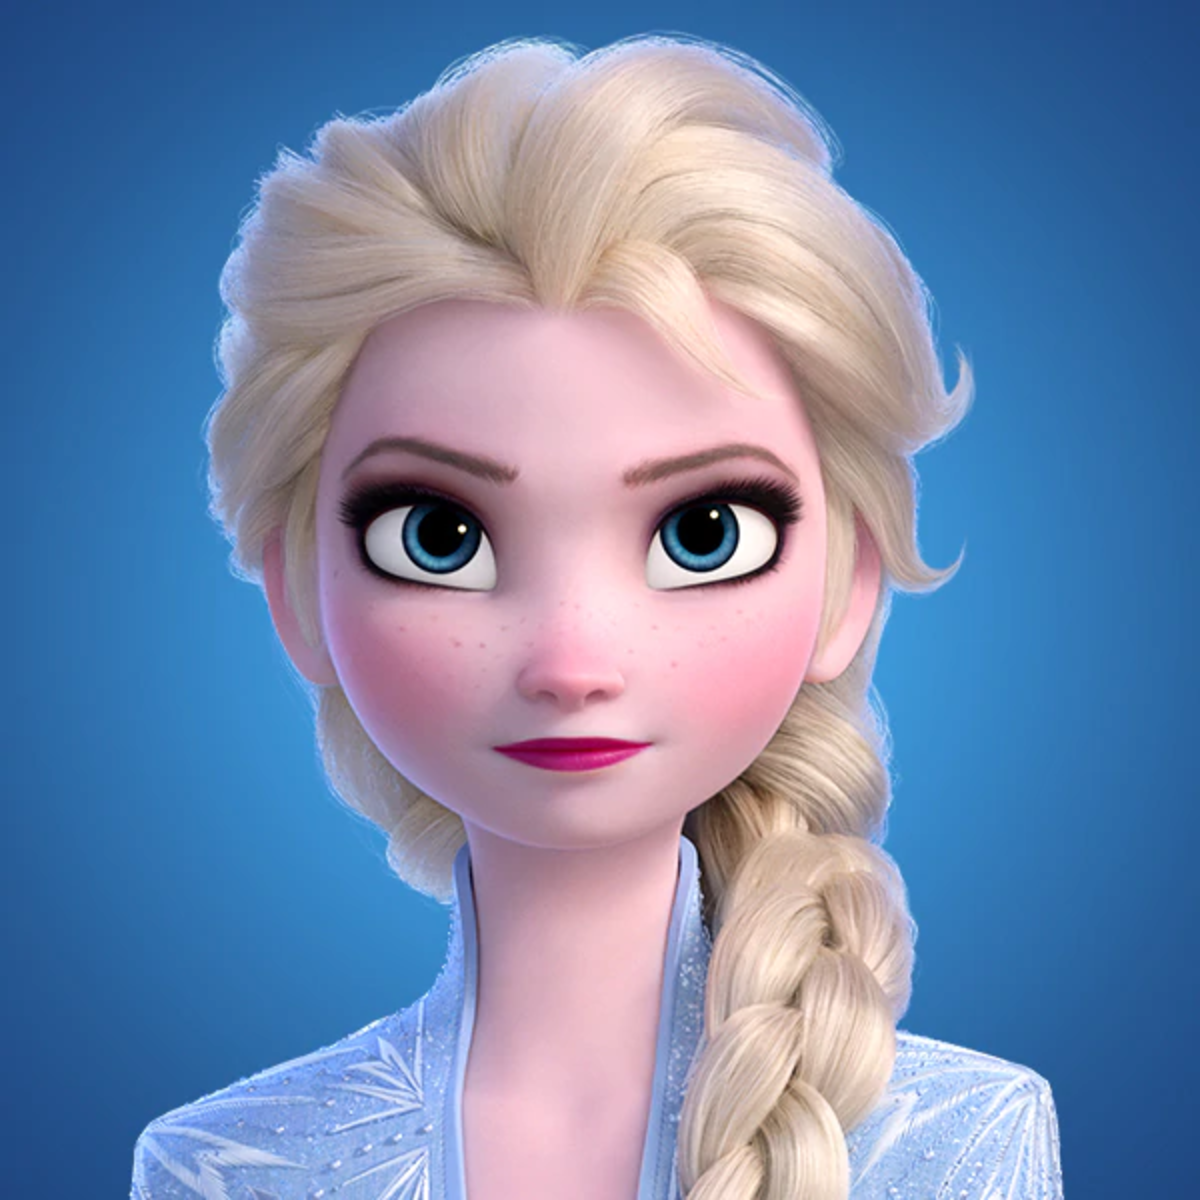 "Frozen" (2013) ends with family love, but no handsome prince waiting for Elsa.